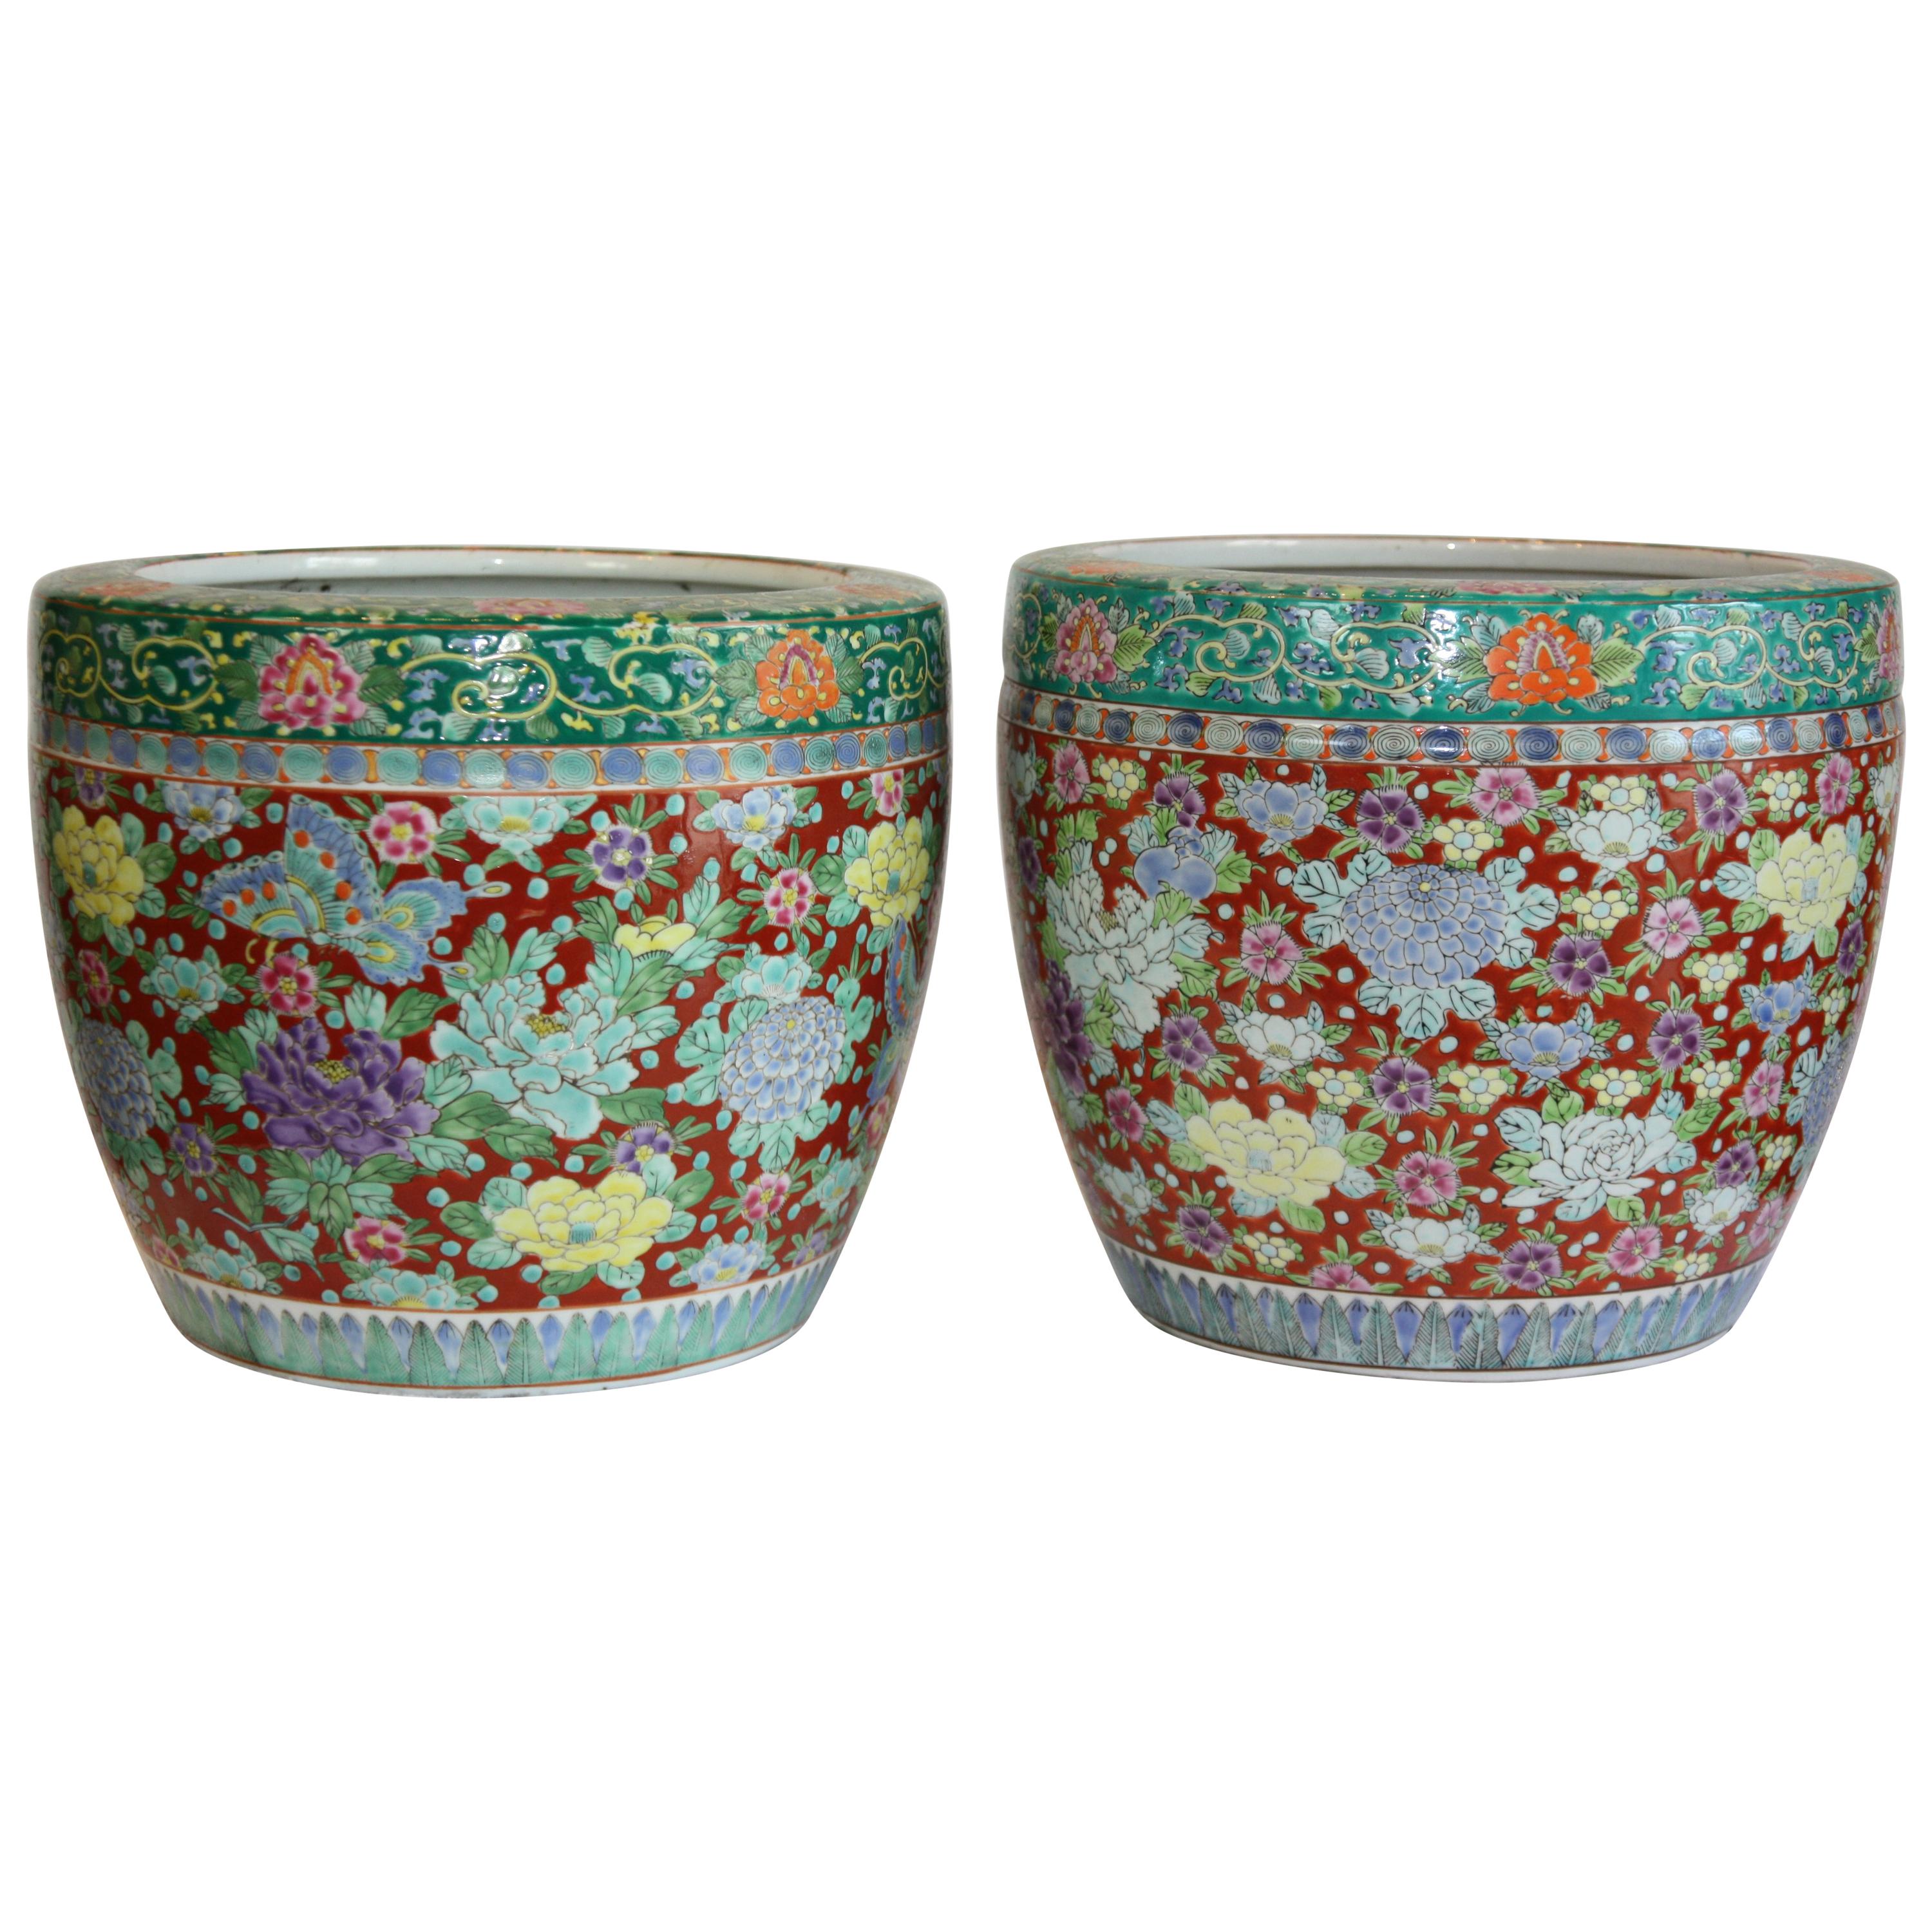 Lovely Pair of Late 19th Century Hand-Painted, Red and Green Jardinières